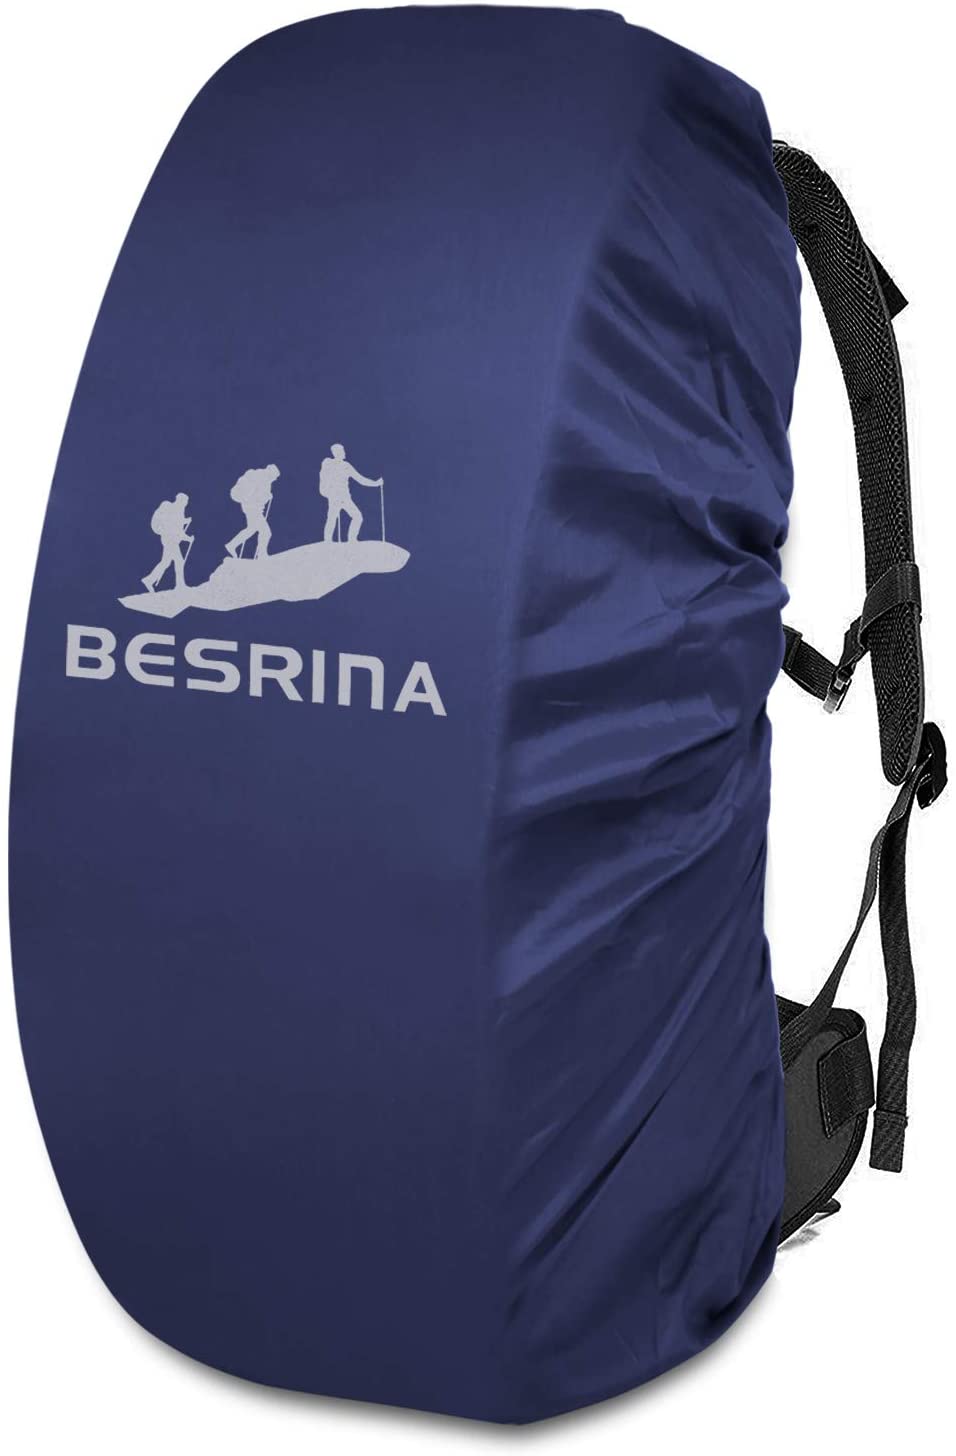 Besrina Backpack Rain Cover ,Upgraded Non-Slip Cross Buckle Strap & Reflective Waterproof Rucksack Cover for Hiking Camping Traveling Cycling 15-90L 